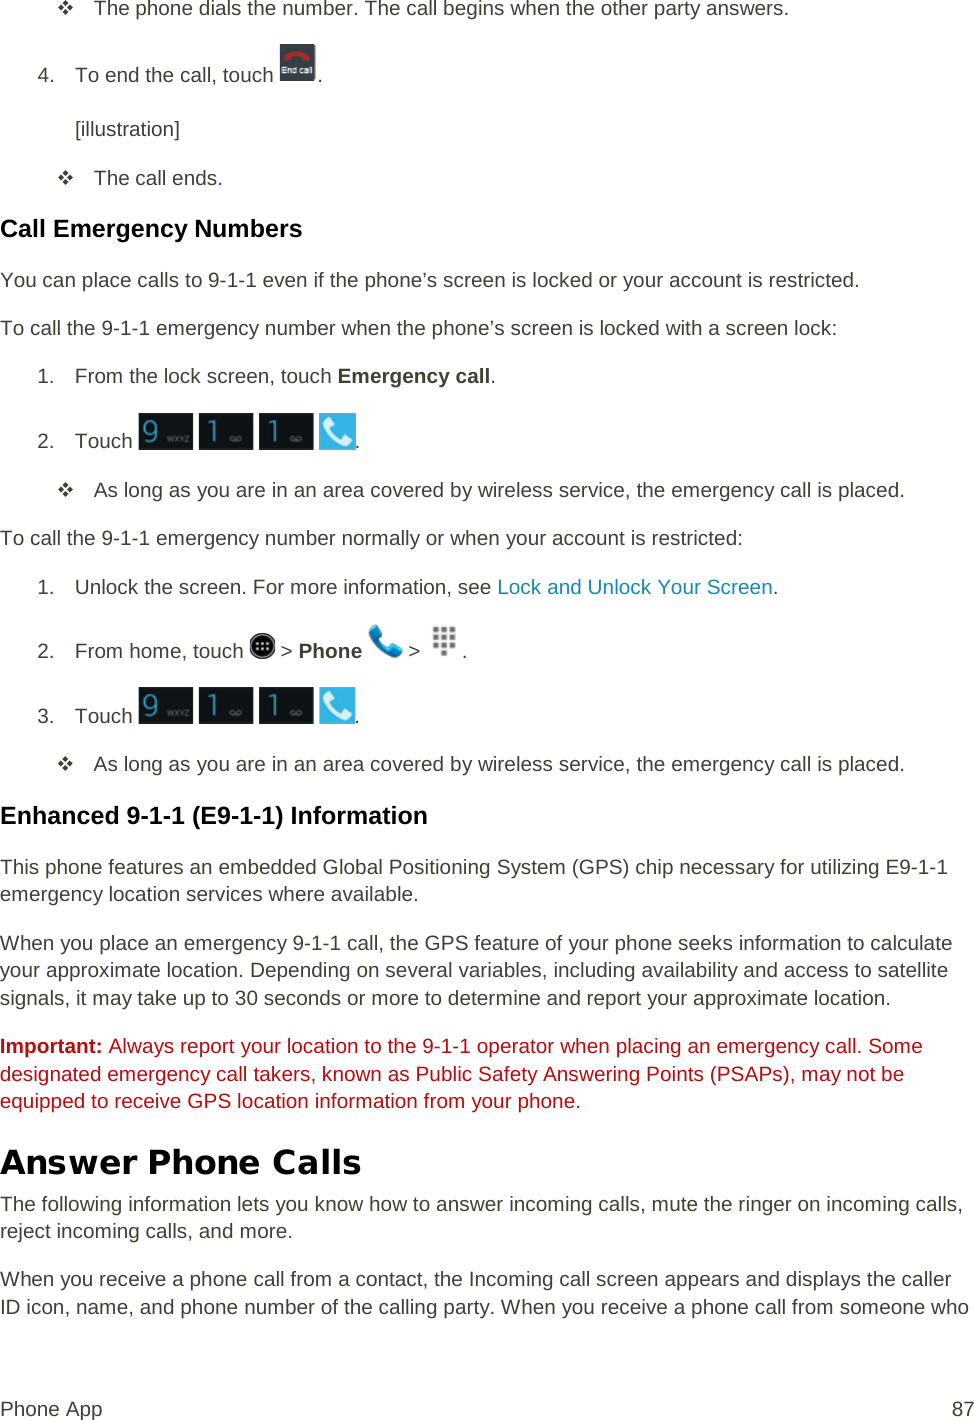  The phone dials the number. The call begins when the other party answers. 4. To end the call, touch  .  [illustration]  The call ends. Call Emergency Numbers You can place calls to 9-1-1 even if the phone’s screen is locked or your account is restricted. To call the 9-1-1 emergency number when the phone’s screen is locked with a screen lock: 1. From the lock screen, touch Emergency call. 2. Touch        .  As long as you are in an area covered by wireless service, the emergency call is placed. To call the 9-1-1 emergency number normally or when your account is restricted: 1. Unlock the screen. For more information, see Lock and Unlock Your Screen. 2. From home, touch   &gt; Phone   &gt;  . 3. Touch        .  As long as you are in an area covered by wireless service, the emergency call is placed. Enhanced 9-1-1 (E9-1-1) Information This phone features an embedded Global Positioning System (GPS) chip necessary for utilizing E9-1-1 emergency location services where available. When you place an emergency 9-1-1 call, the GPS feature of your phone seeks information to calculate your approximate location. Depending on several variables, including availability and access to satellite signals, it may take up to 30 seconds or more to determine and report your approximate location. Important: Always report your location to the 9-1-1 operator when placing an emergency call. Some designated emergency call takers, known as Public Safety Answering Points (PSAPs), may not be equipped to receive GPS location information from your phone. Answer Phone Calls The following information lets you know how to answer incoming calls, mute the ringer on incoming calls, reject incoming calls, and more. When you receive a phone call from a contact, the Incoming call screen appears and displays the caller ID icon, name, and phone number of the calling party. When you receive a phone call from someone who Phone App 87 